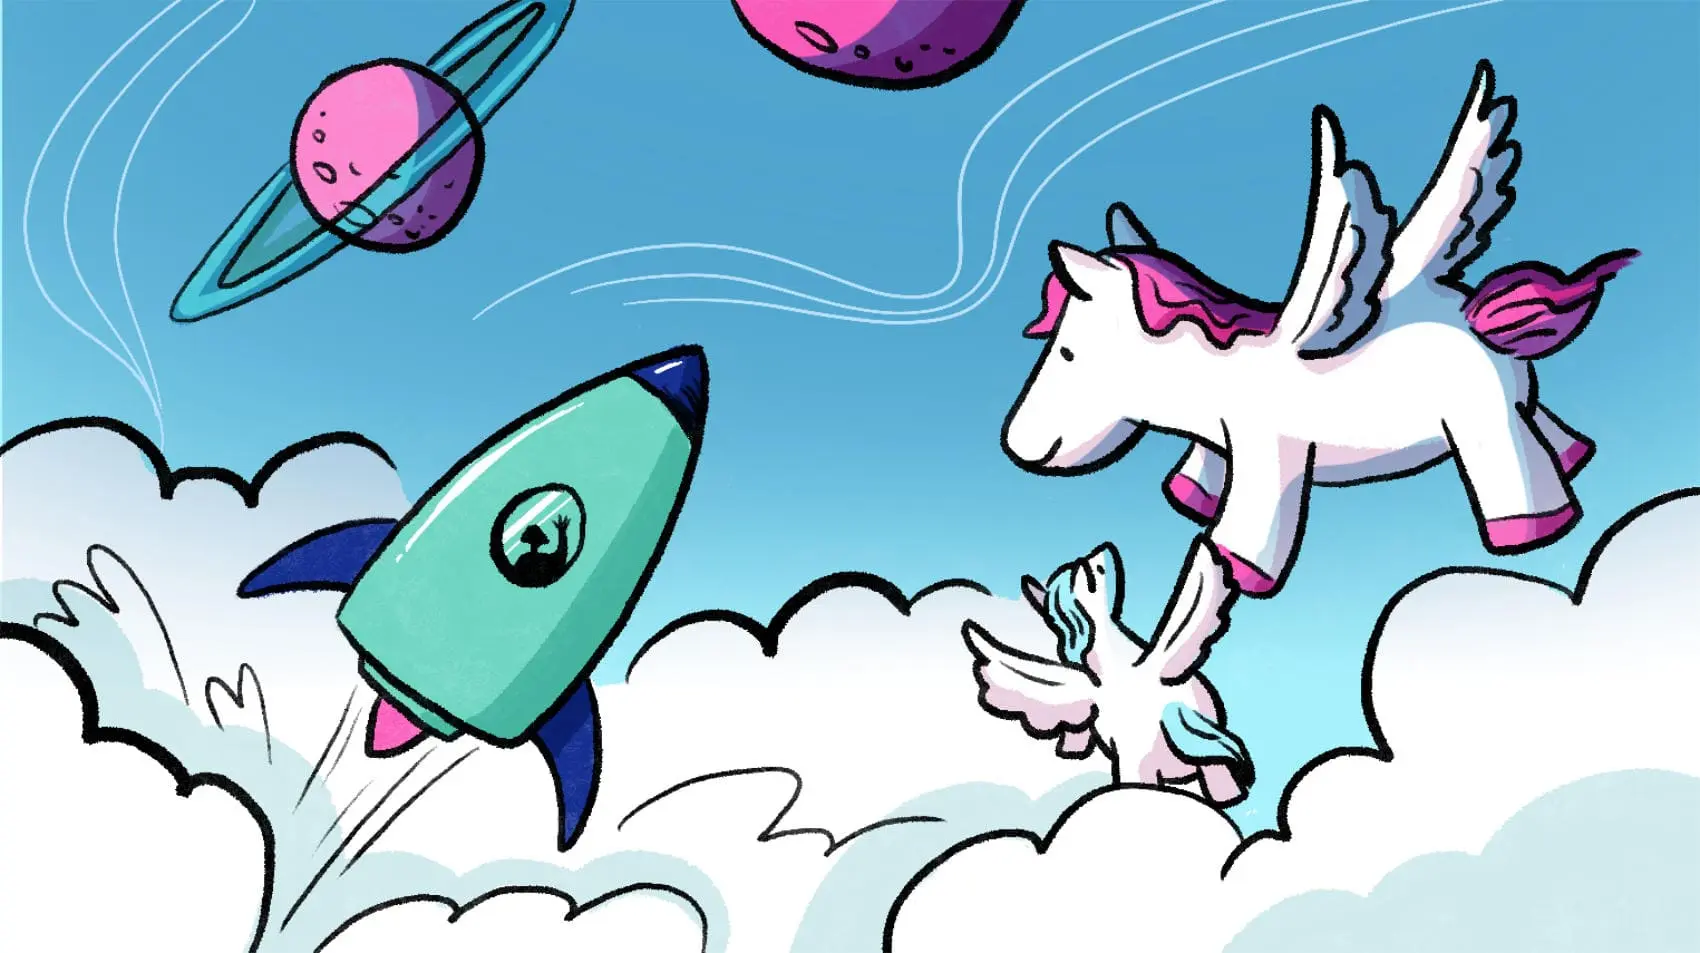 A blue sky with planets in the background. A green rocket flying over the clouds by a pink hair white pony shaped planet next to a blue hair white baby pony.